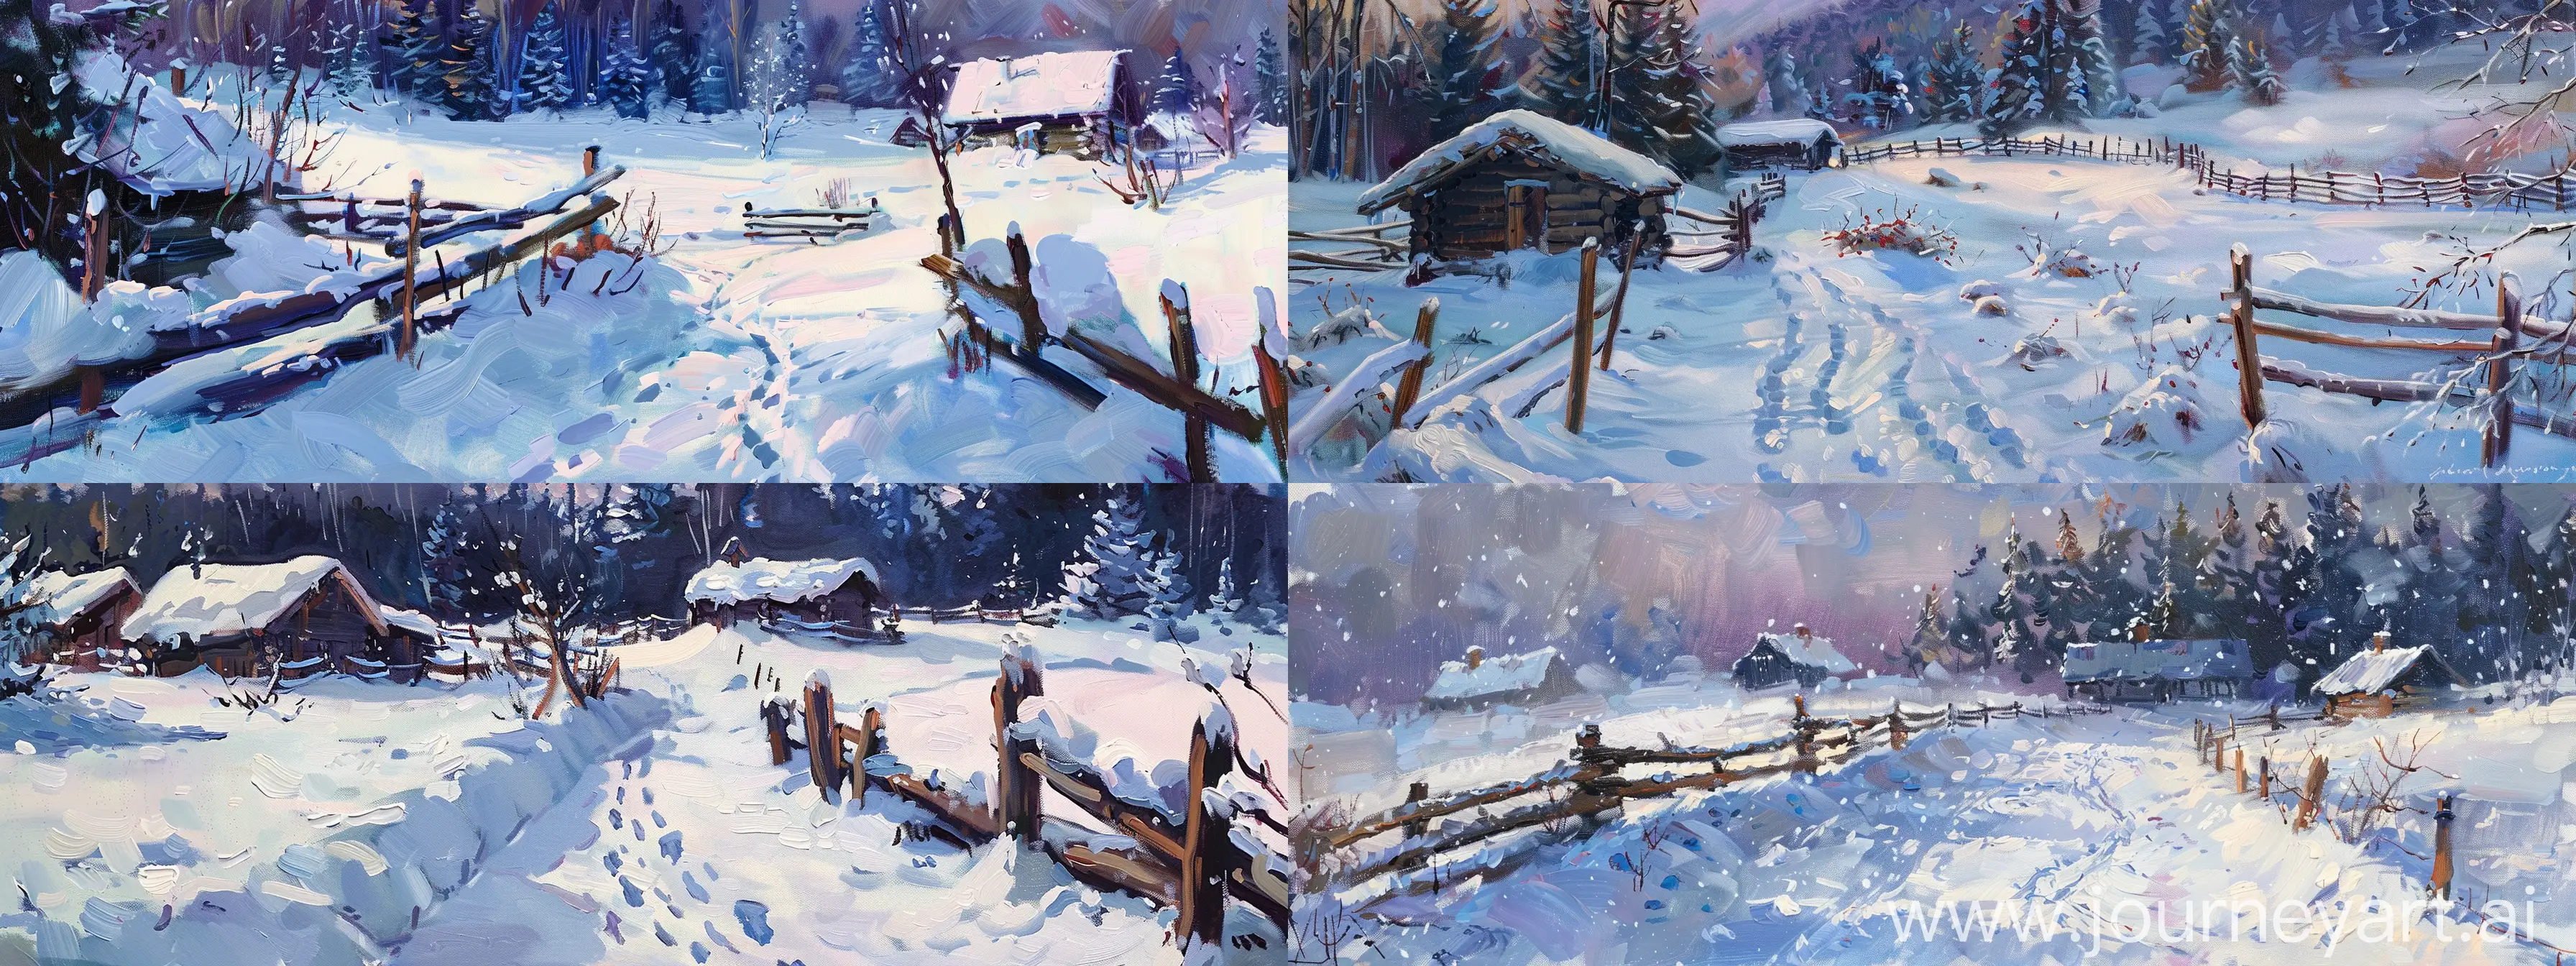 Serene-Winter-Landscape-Painting-with-Snowy-Chalets-and-Forest